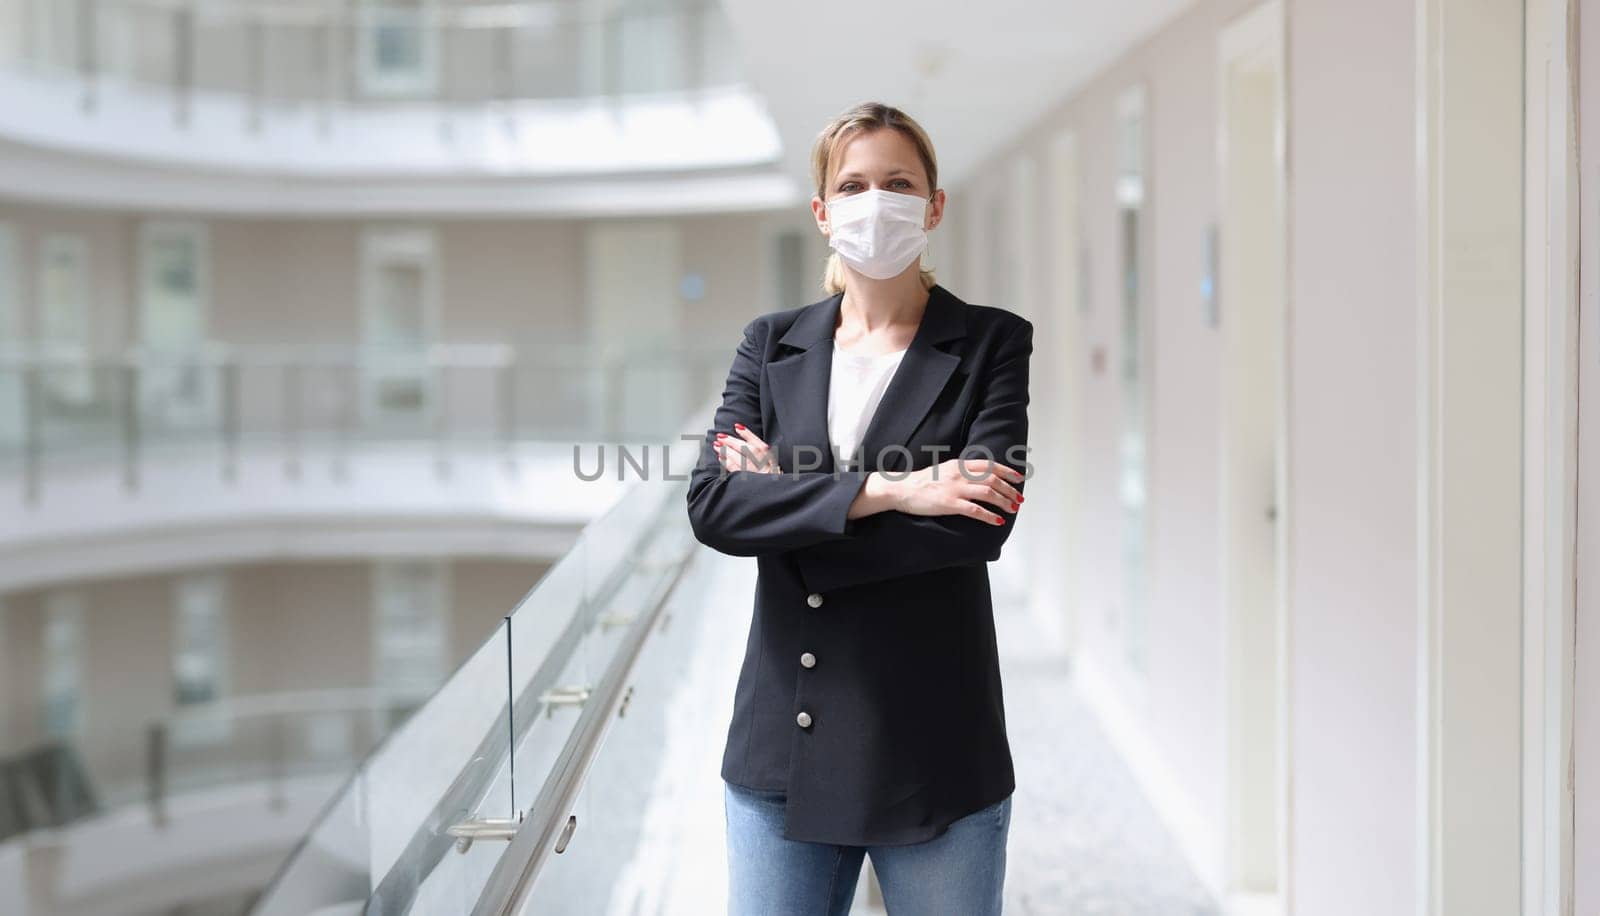 Young woman in suit and protective medical mask standing in corridor of hotel. Hotel customer service during covid19 pandemic concept